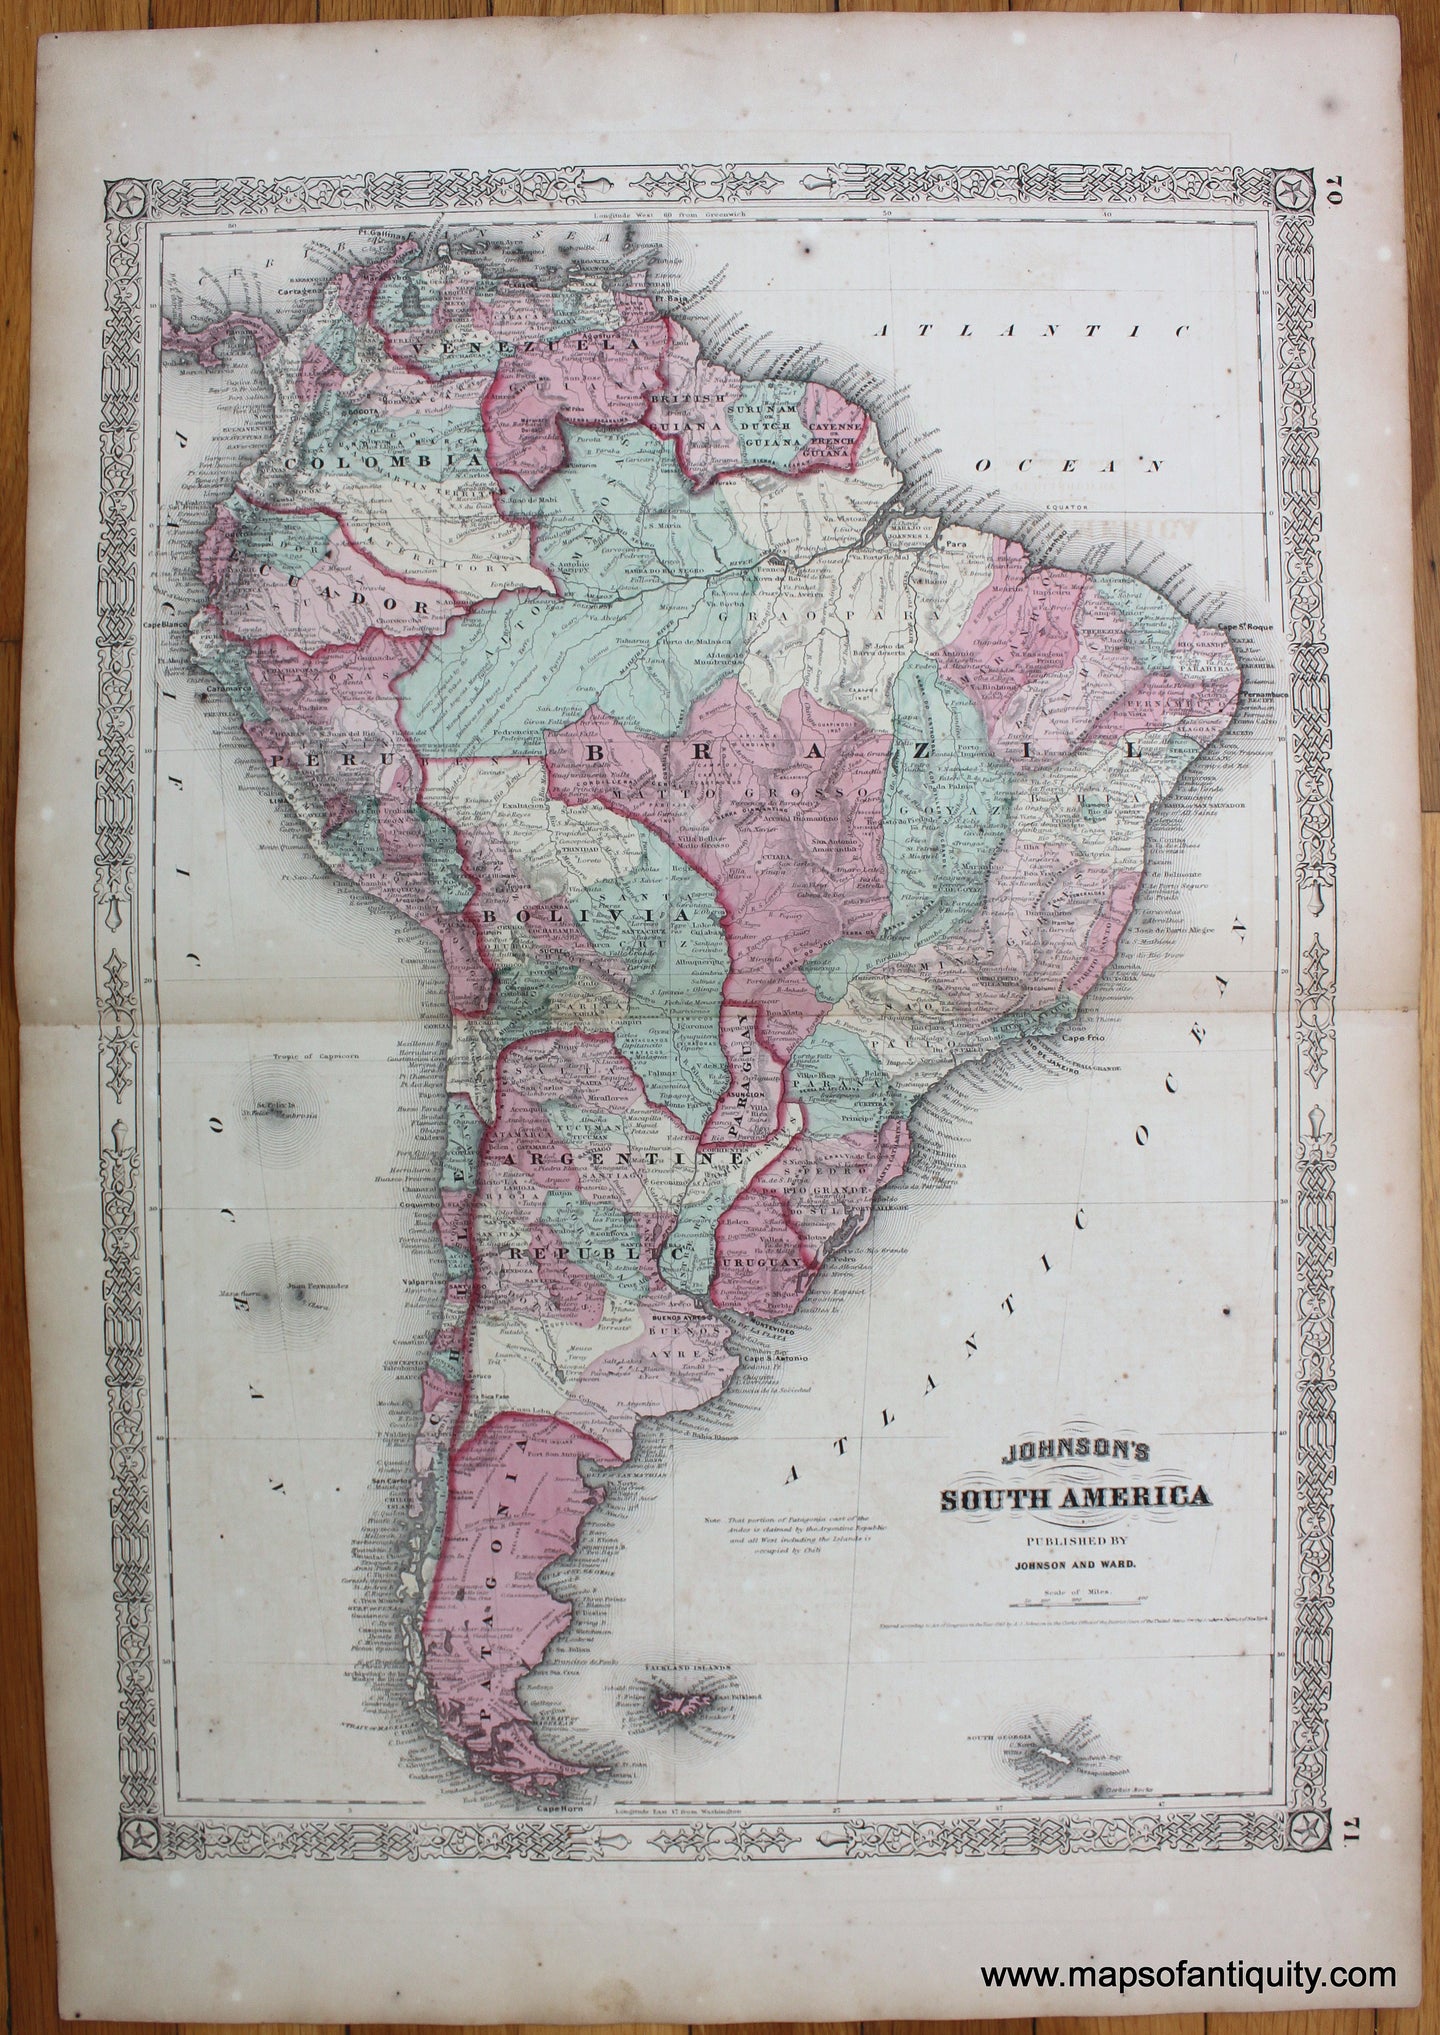 Antique-Hand-Colored-Map-Johnson's-South-America-1864-Johnson-&-Ward-1800s-19th-century-Maps-of-Antiquity